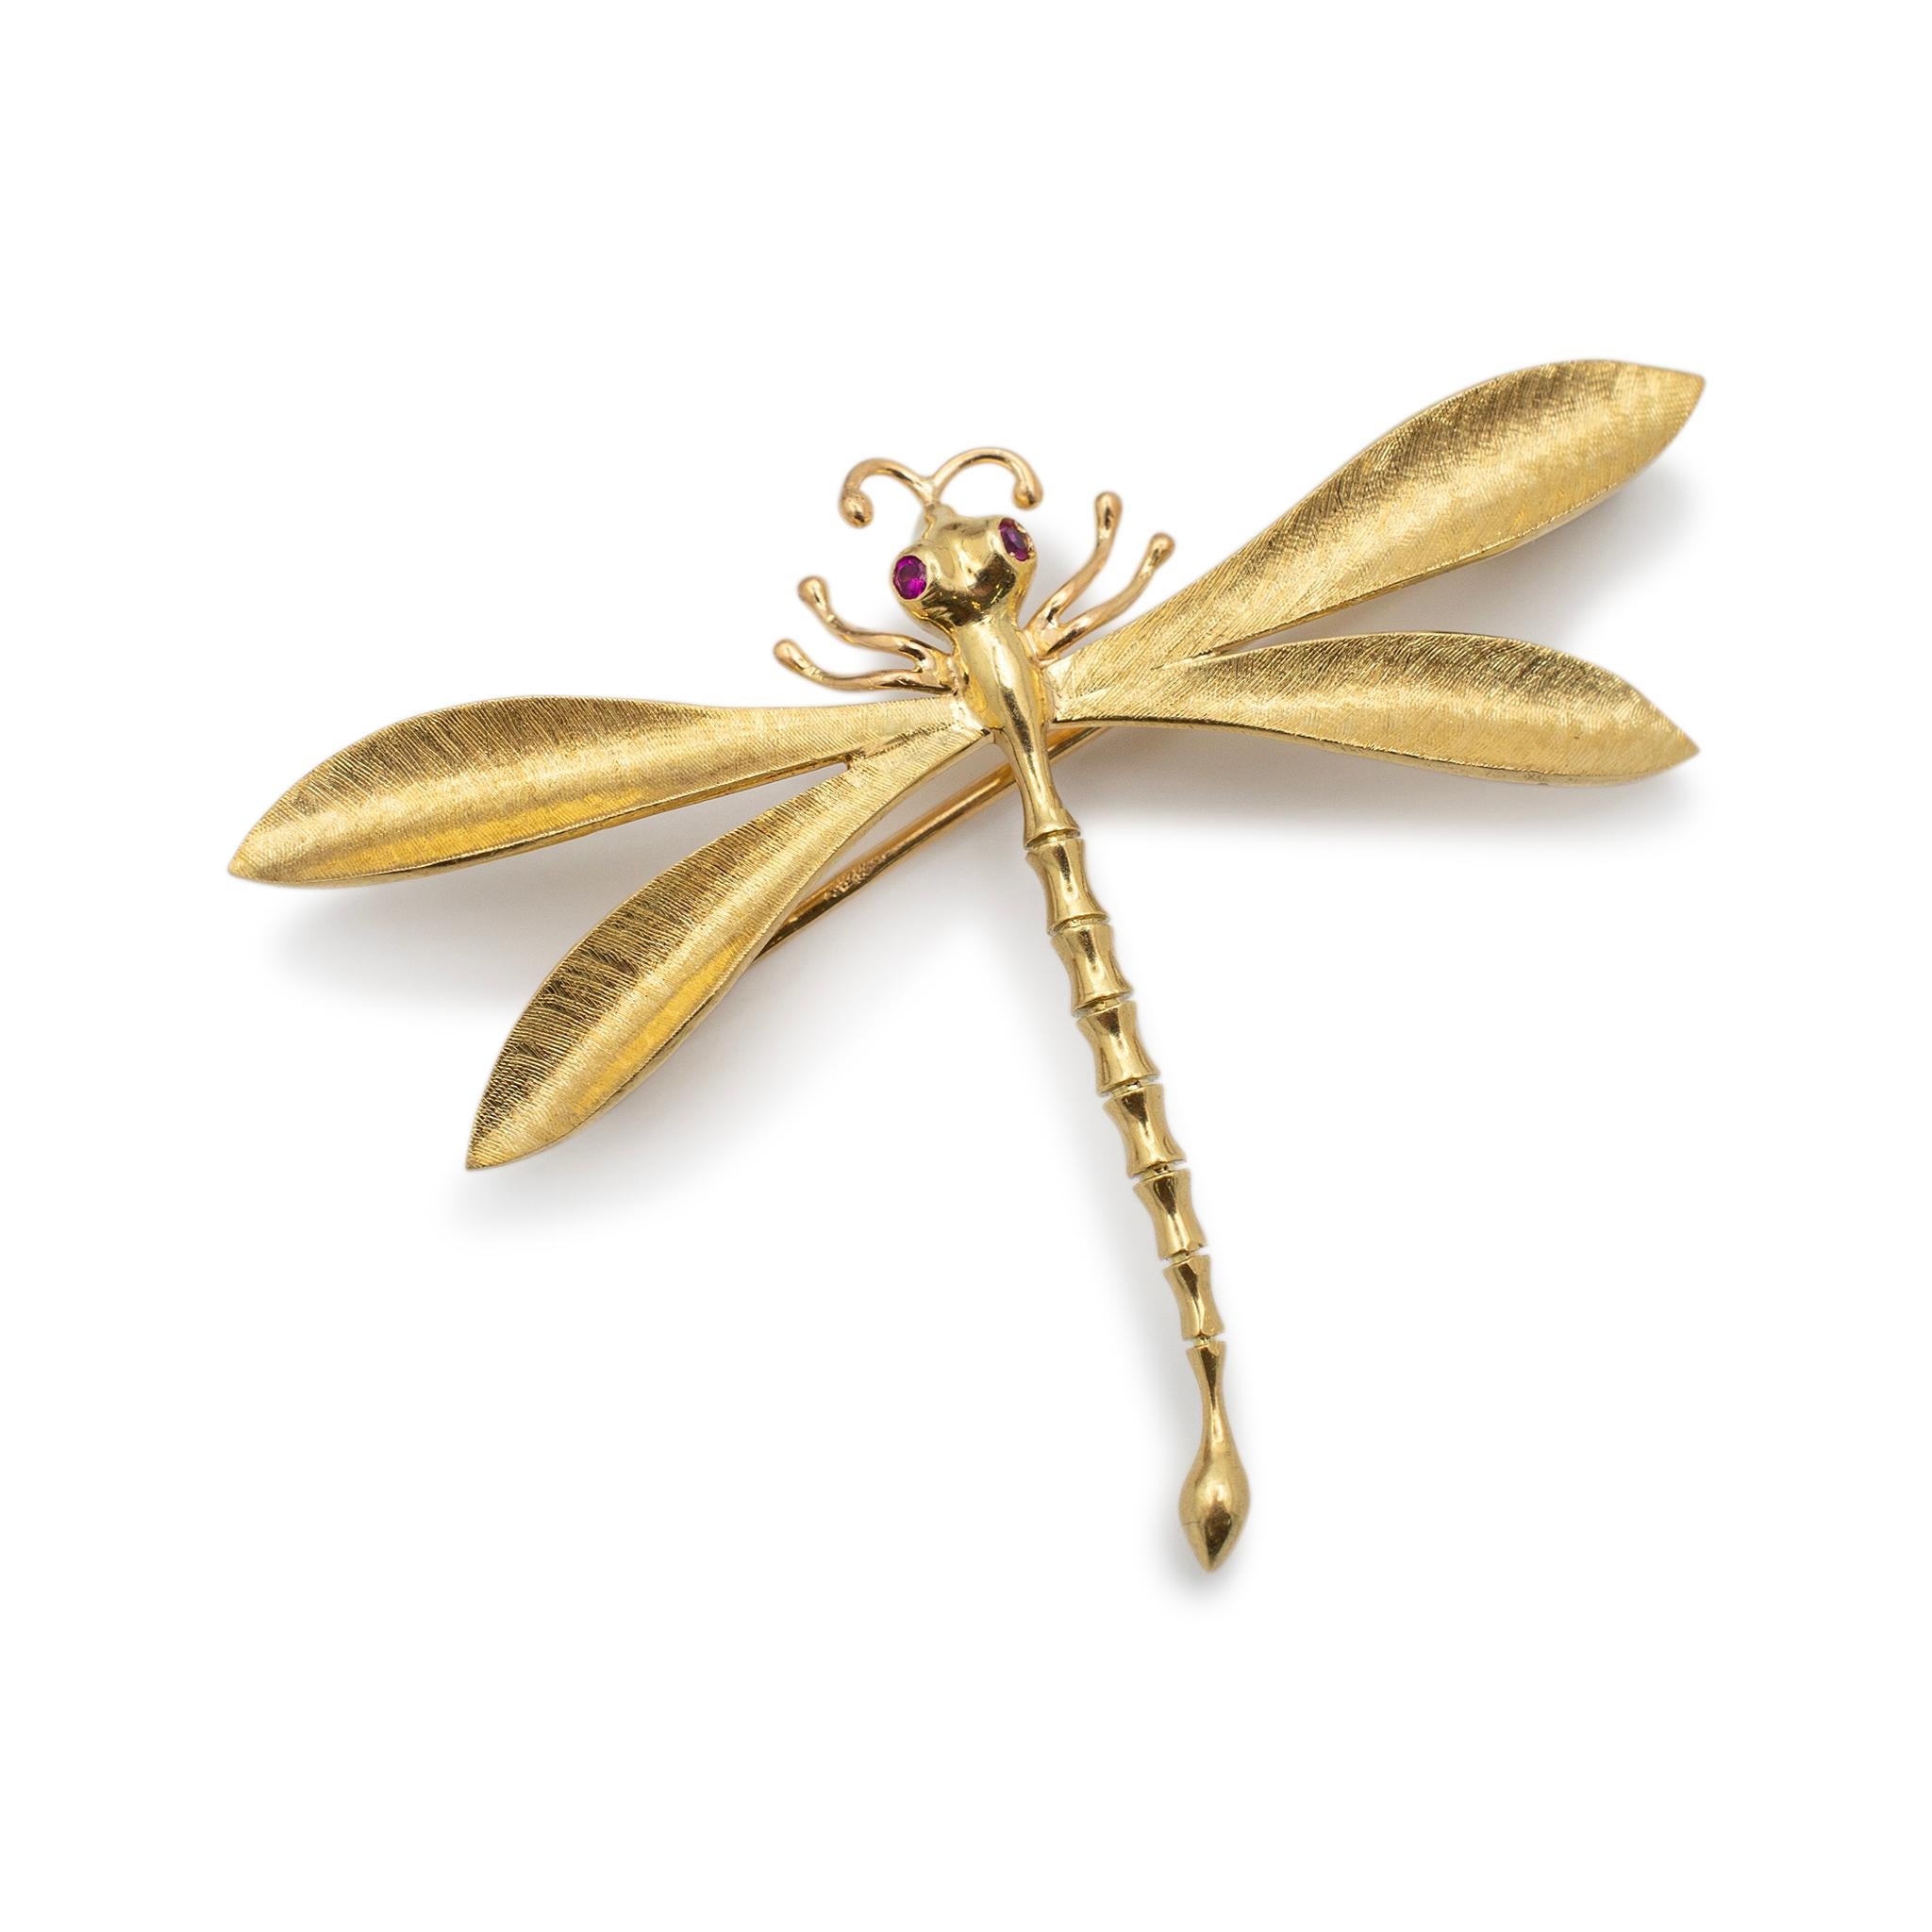 Metal Type: 14K Yellow Gold

Length: 1.50 inches

Width: 2.00 inches

Weight: 5.60 grams

14K yellow gold animal ruby vintage brooch. The metal was tested and determined to be 14K yellow gold. Engraved with 